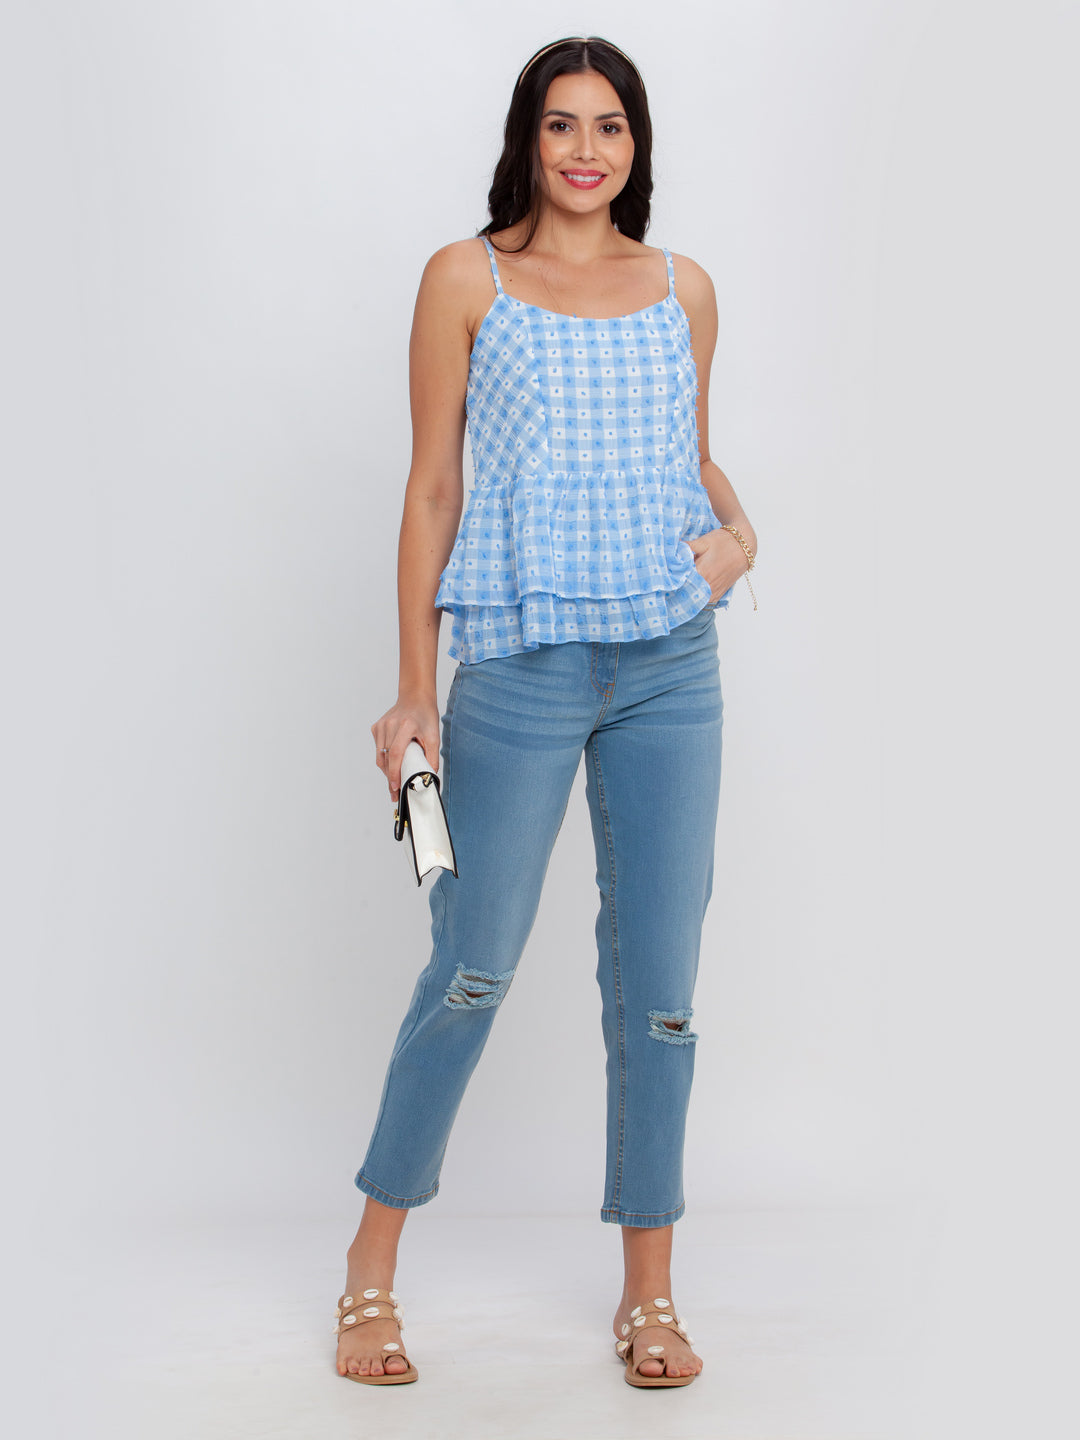 Blue Printed Strappy Top For Women